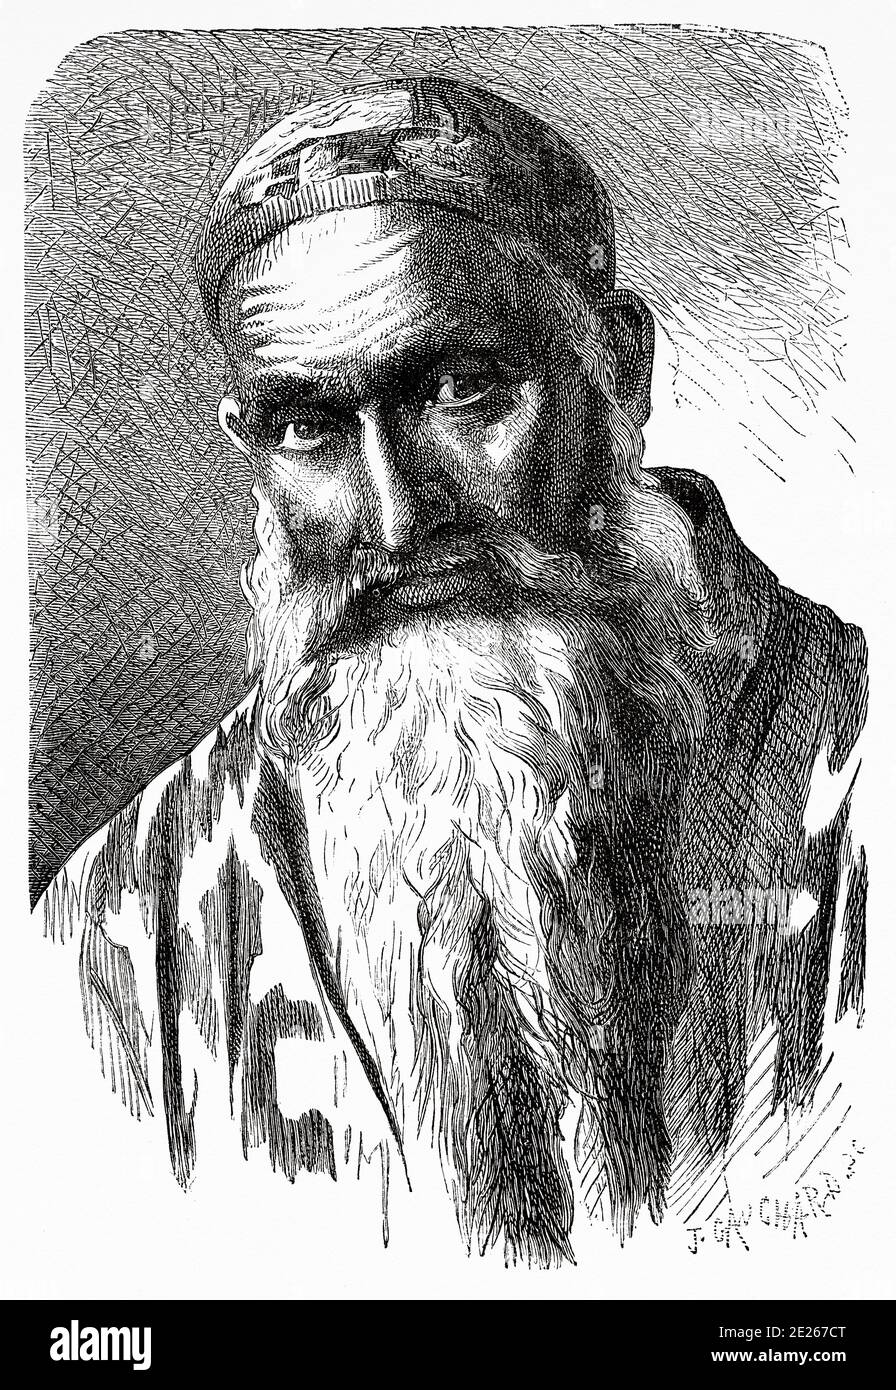 Portrait of an Arab man with a long beard, from Travels in central Asia 1863 by Armin Vambery. Old engraving El Mundo en la Mano 1878 Stock Photo